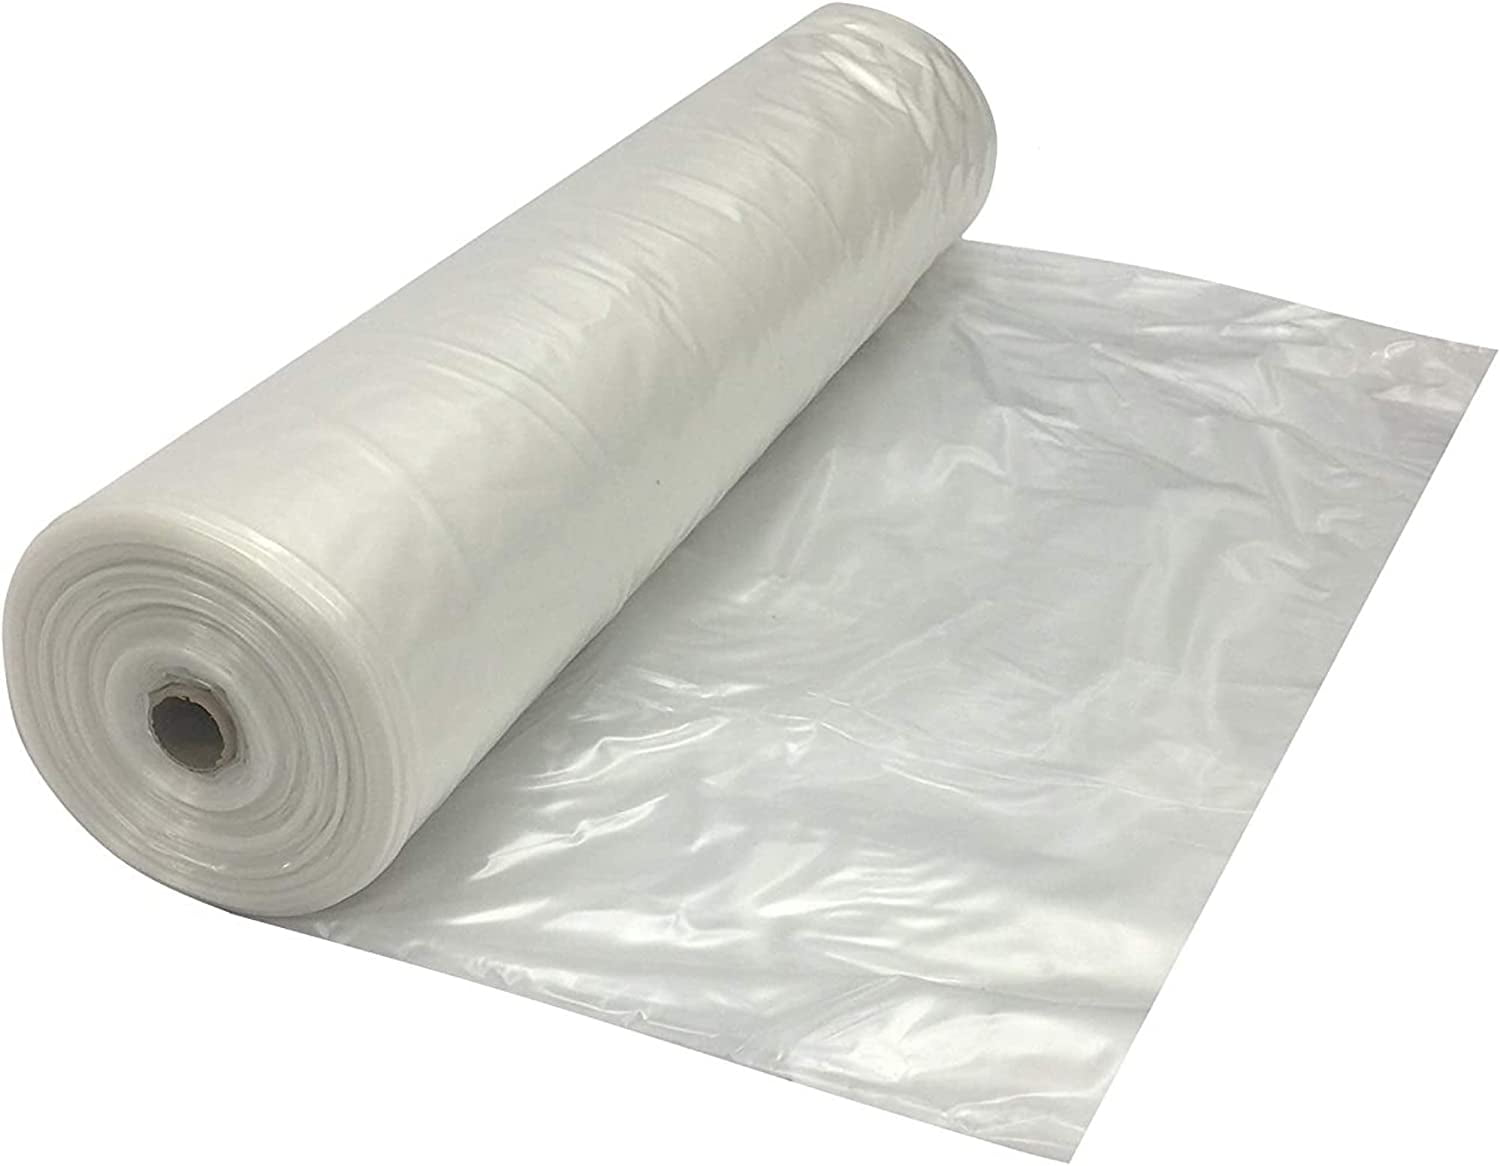 3M 06728 Plastic Sheeting, Clear